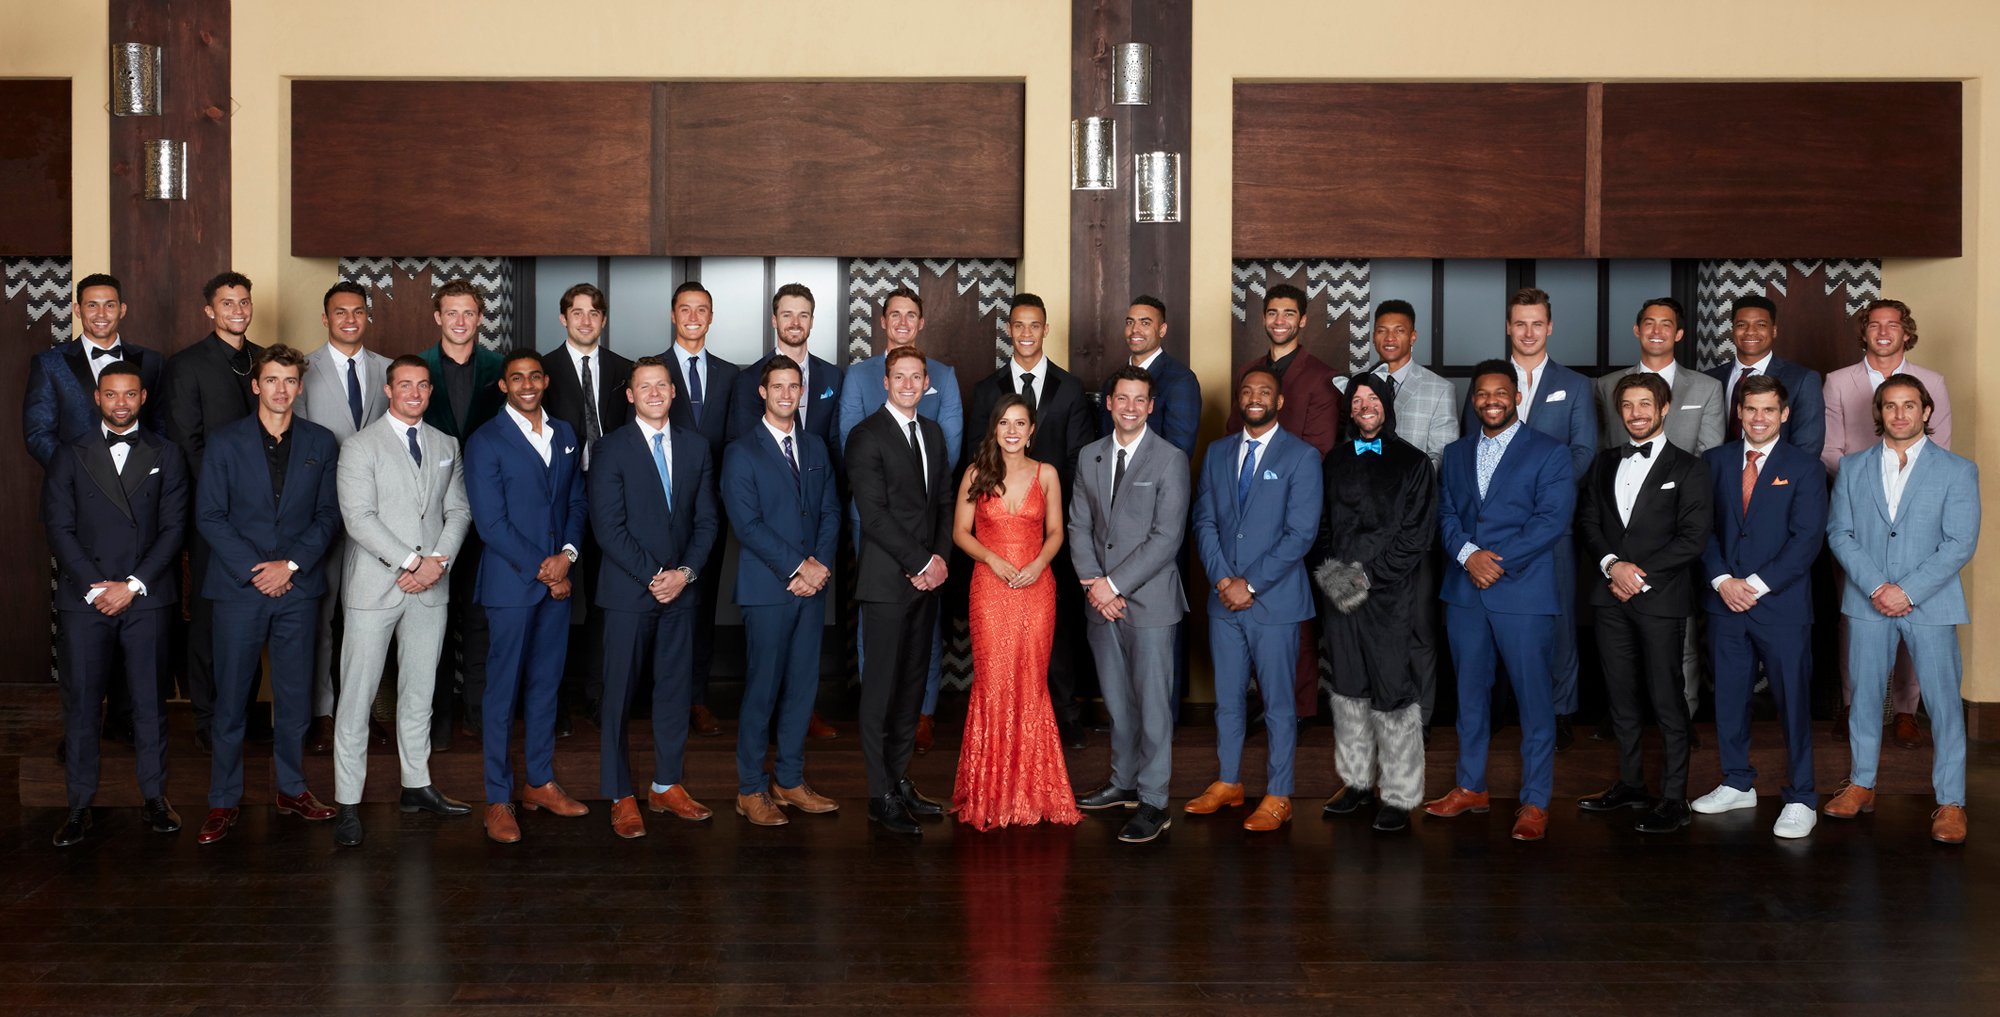 Group photo of ‘The Bachelorette’ Season 17 cast with Katie Thurston in 2021